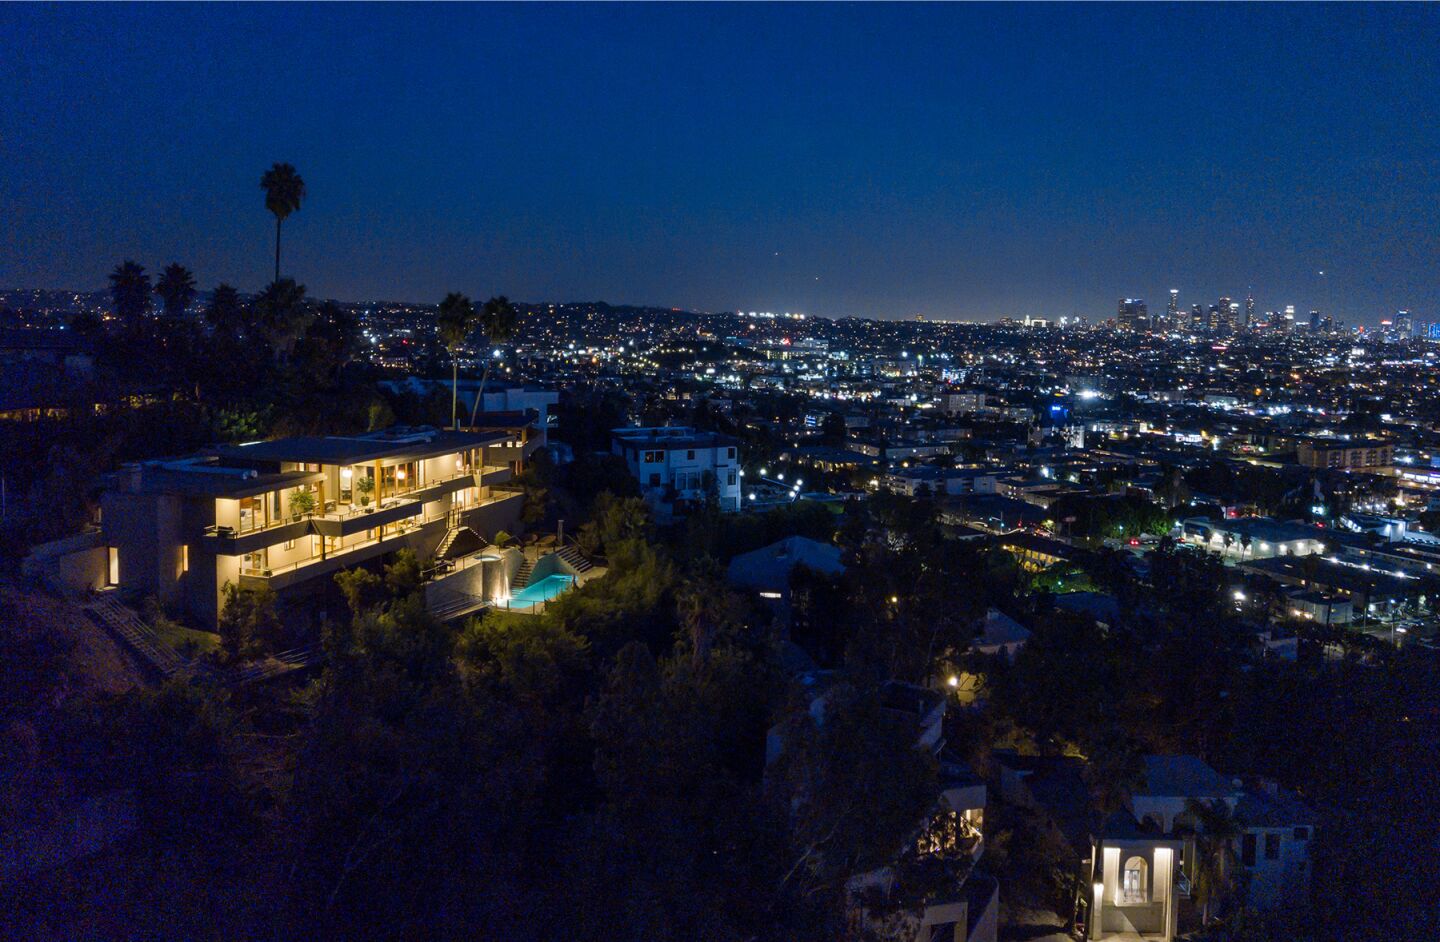 The hillside home at night.